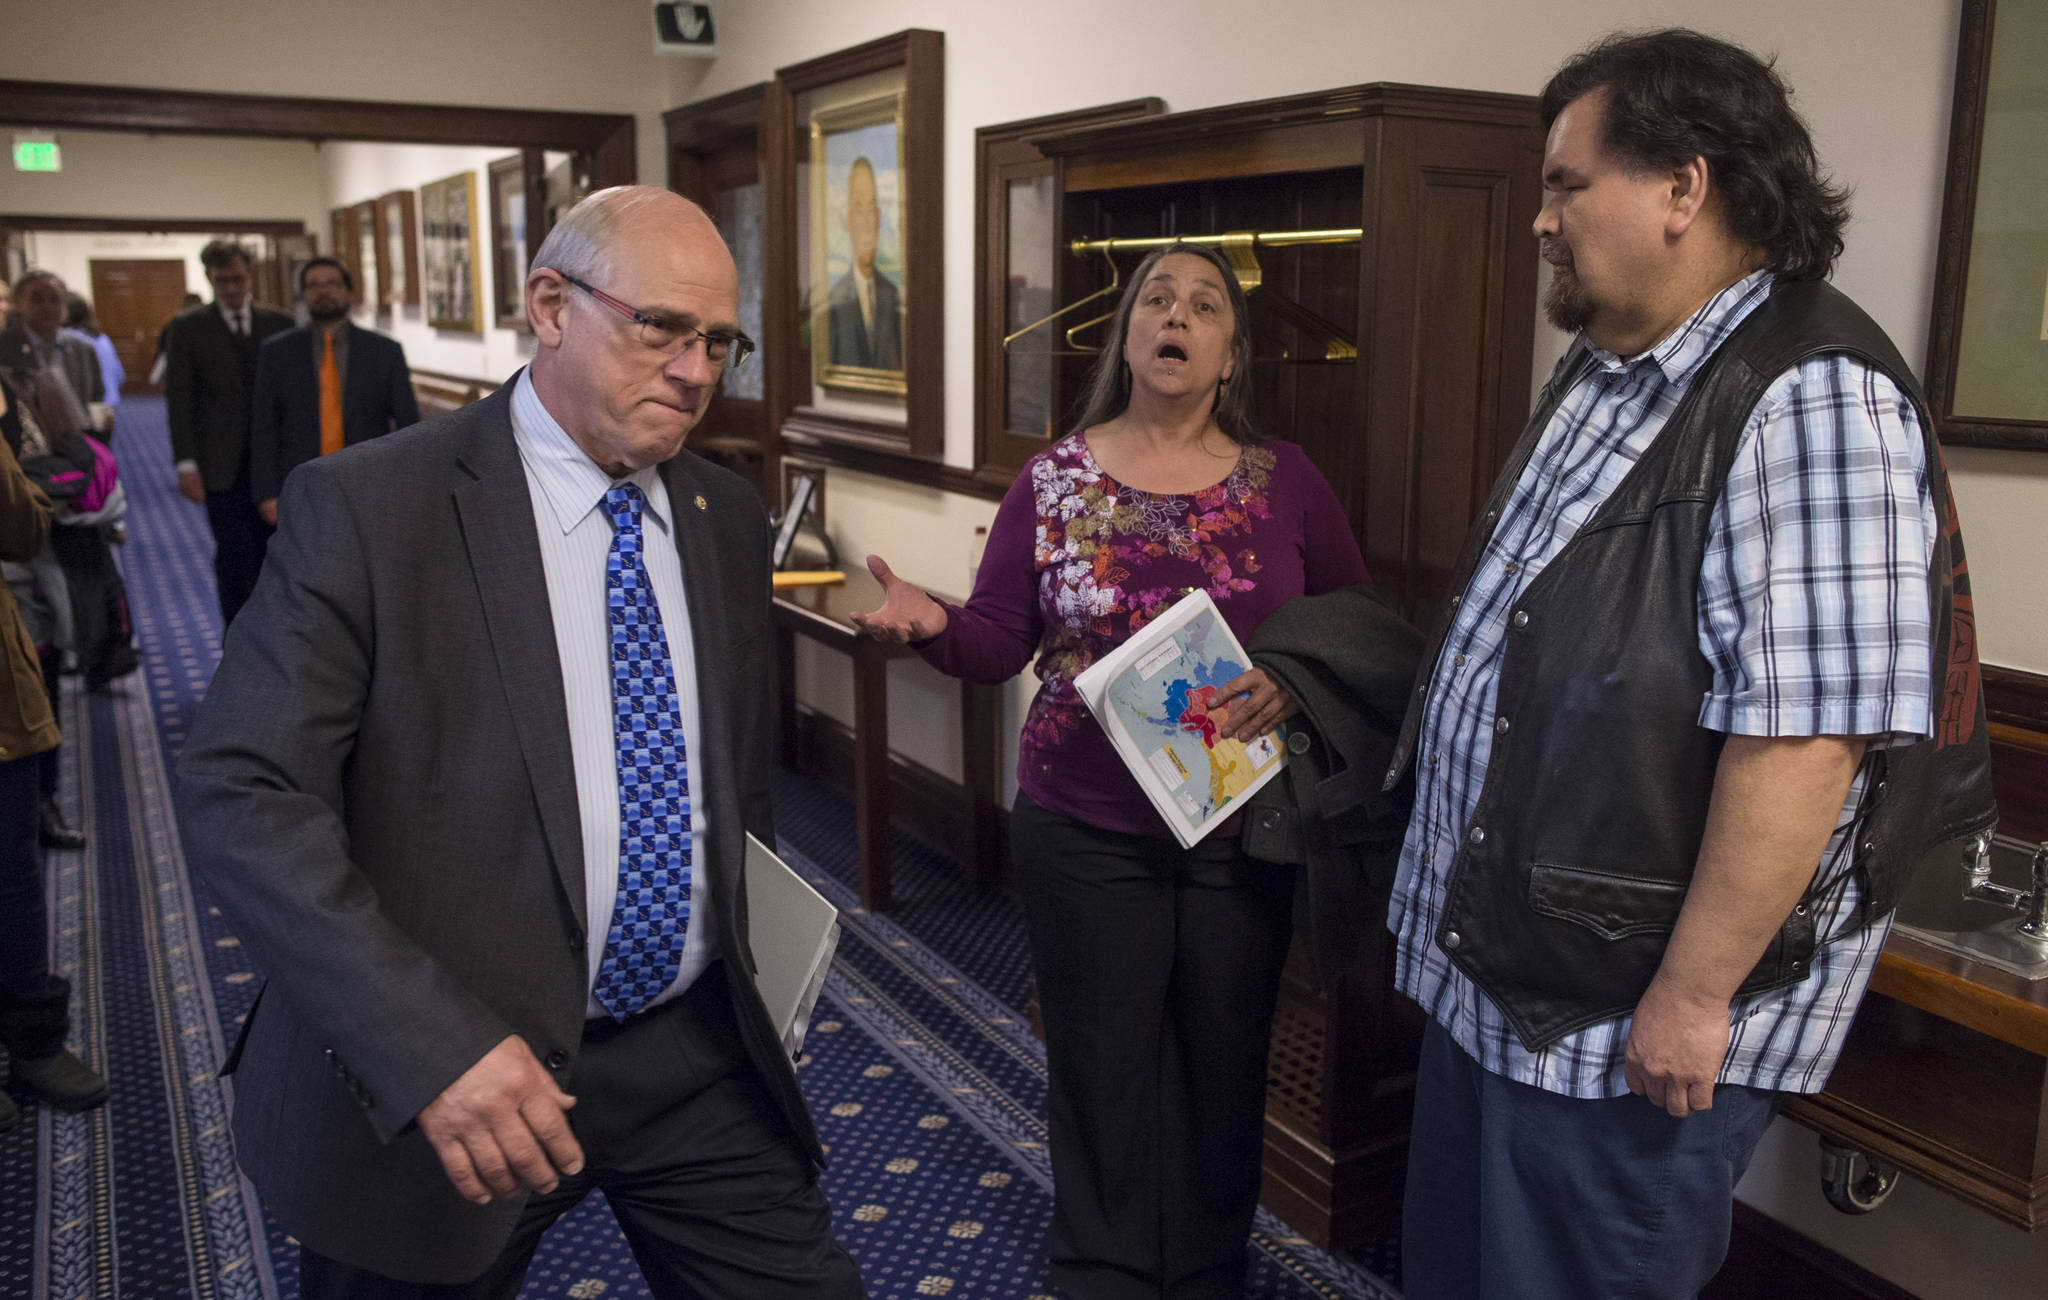 Nancy Keen, center, and Alfie Price, right, sing a Nisga’a prayer song as senators, including Sen. John Coghill, R-North Pole, make their way to the Senate chambers for a session on Wednesday, April 25, 2018. Senators were to vote on a resolution urging Gov. Bill Walker to issue an administrative order recognizing a linguistic emergency for Alaska Native languages. (Michael Penn | Juneau Empire)